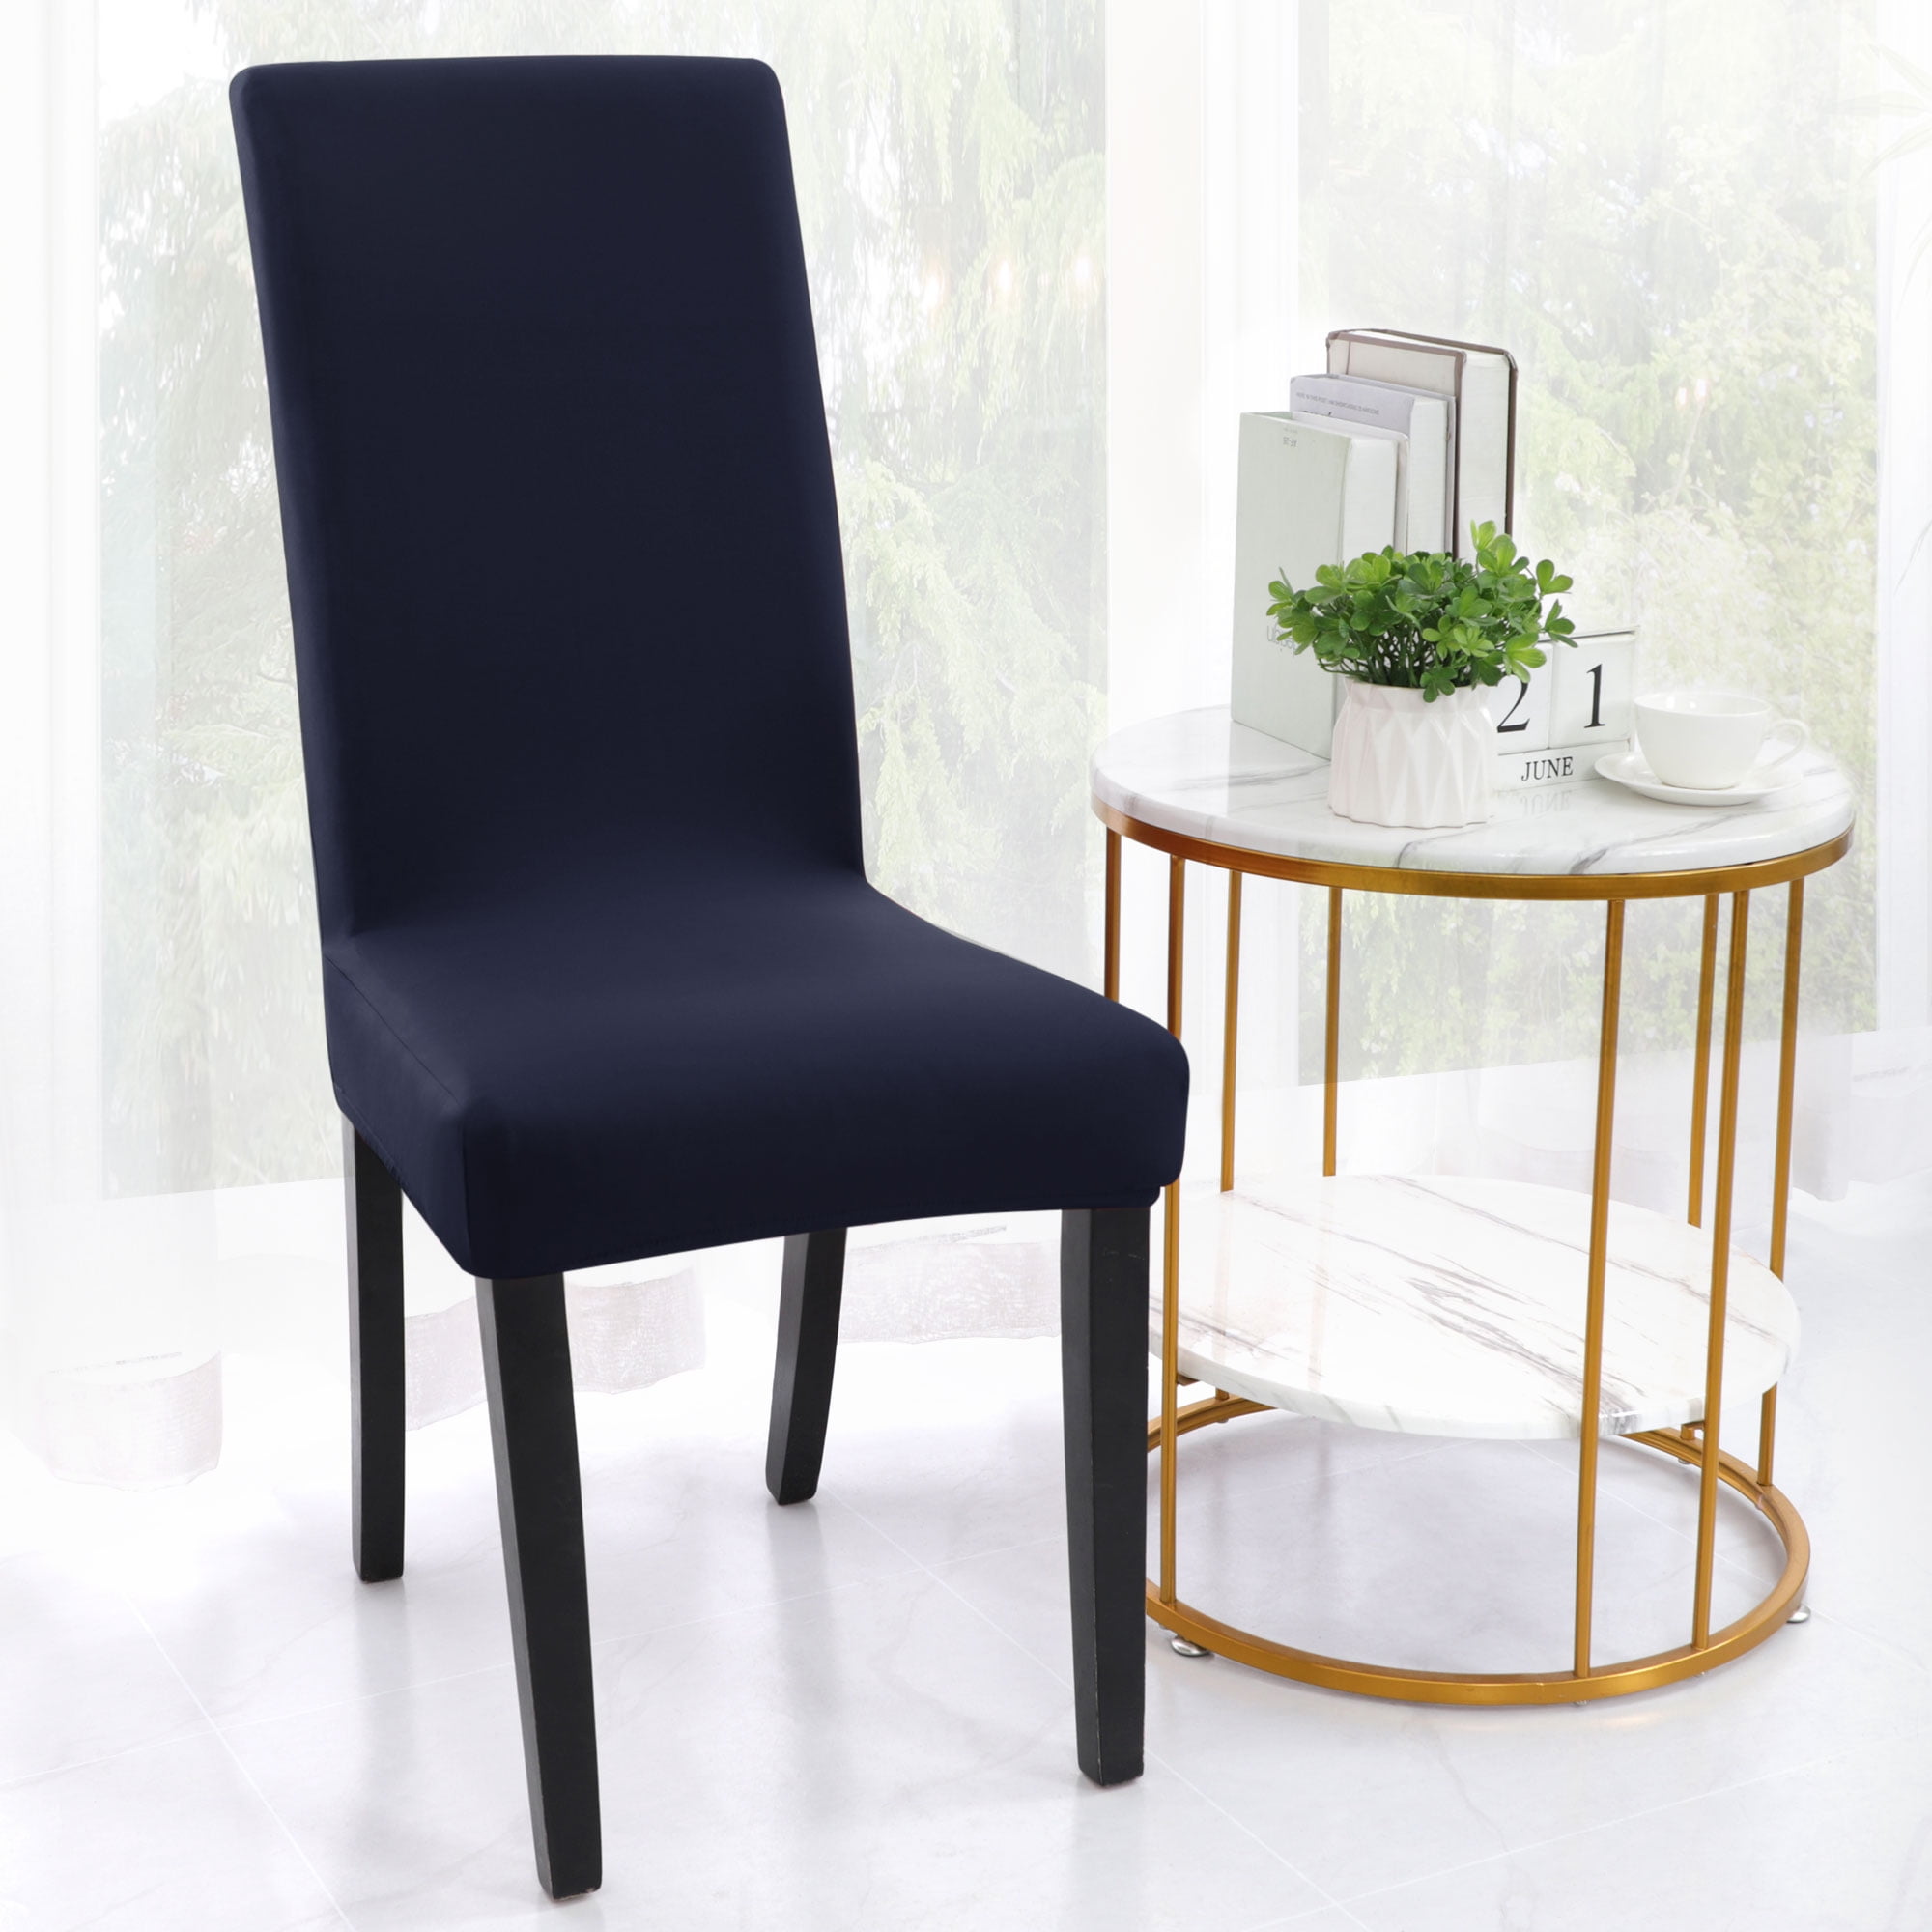 Details about   PU Leather Dining Chair Cover Slip Stretch Elastic Waterproof Slipcover Decor 